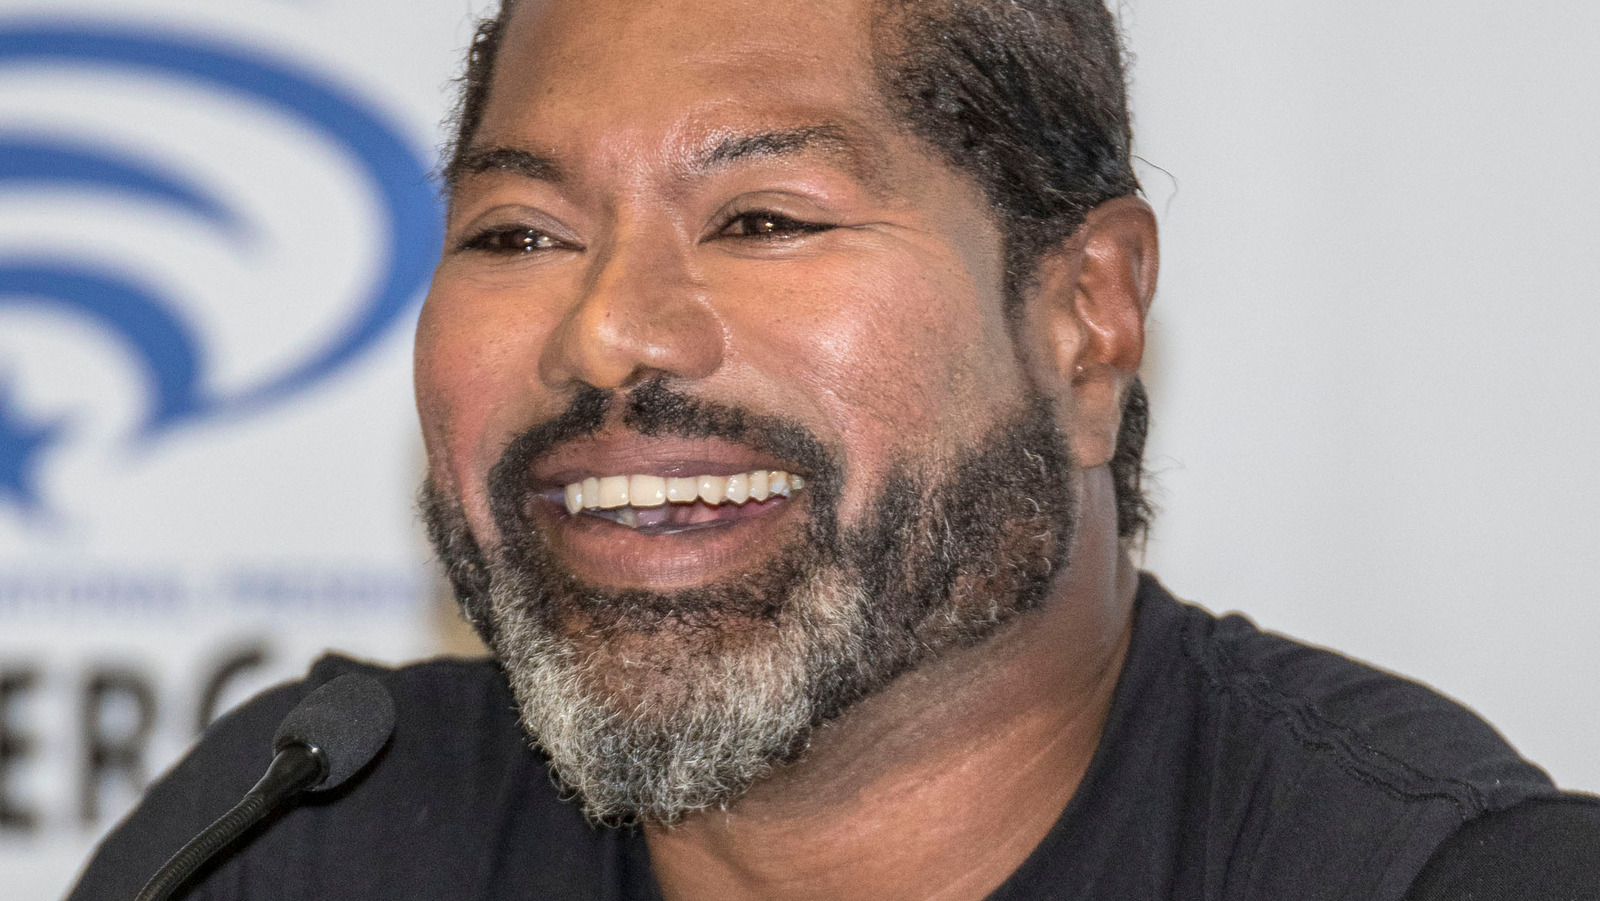 GOW voice actor Christopher Judge clarifies on delay about